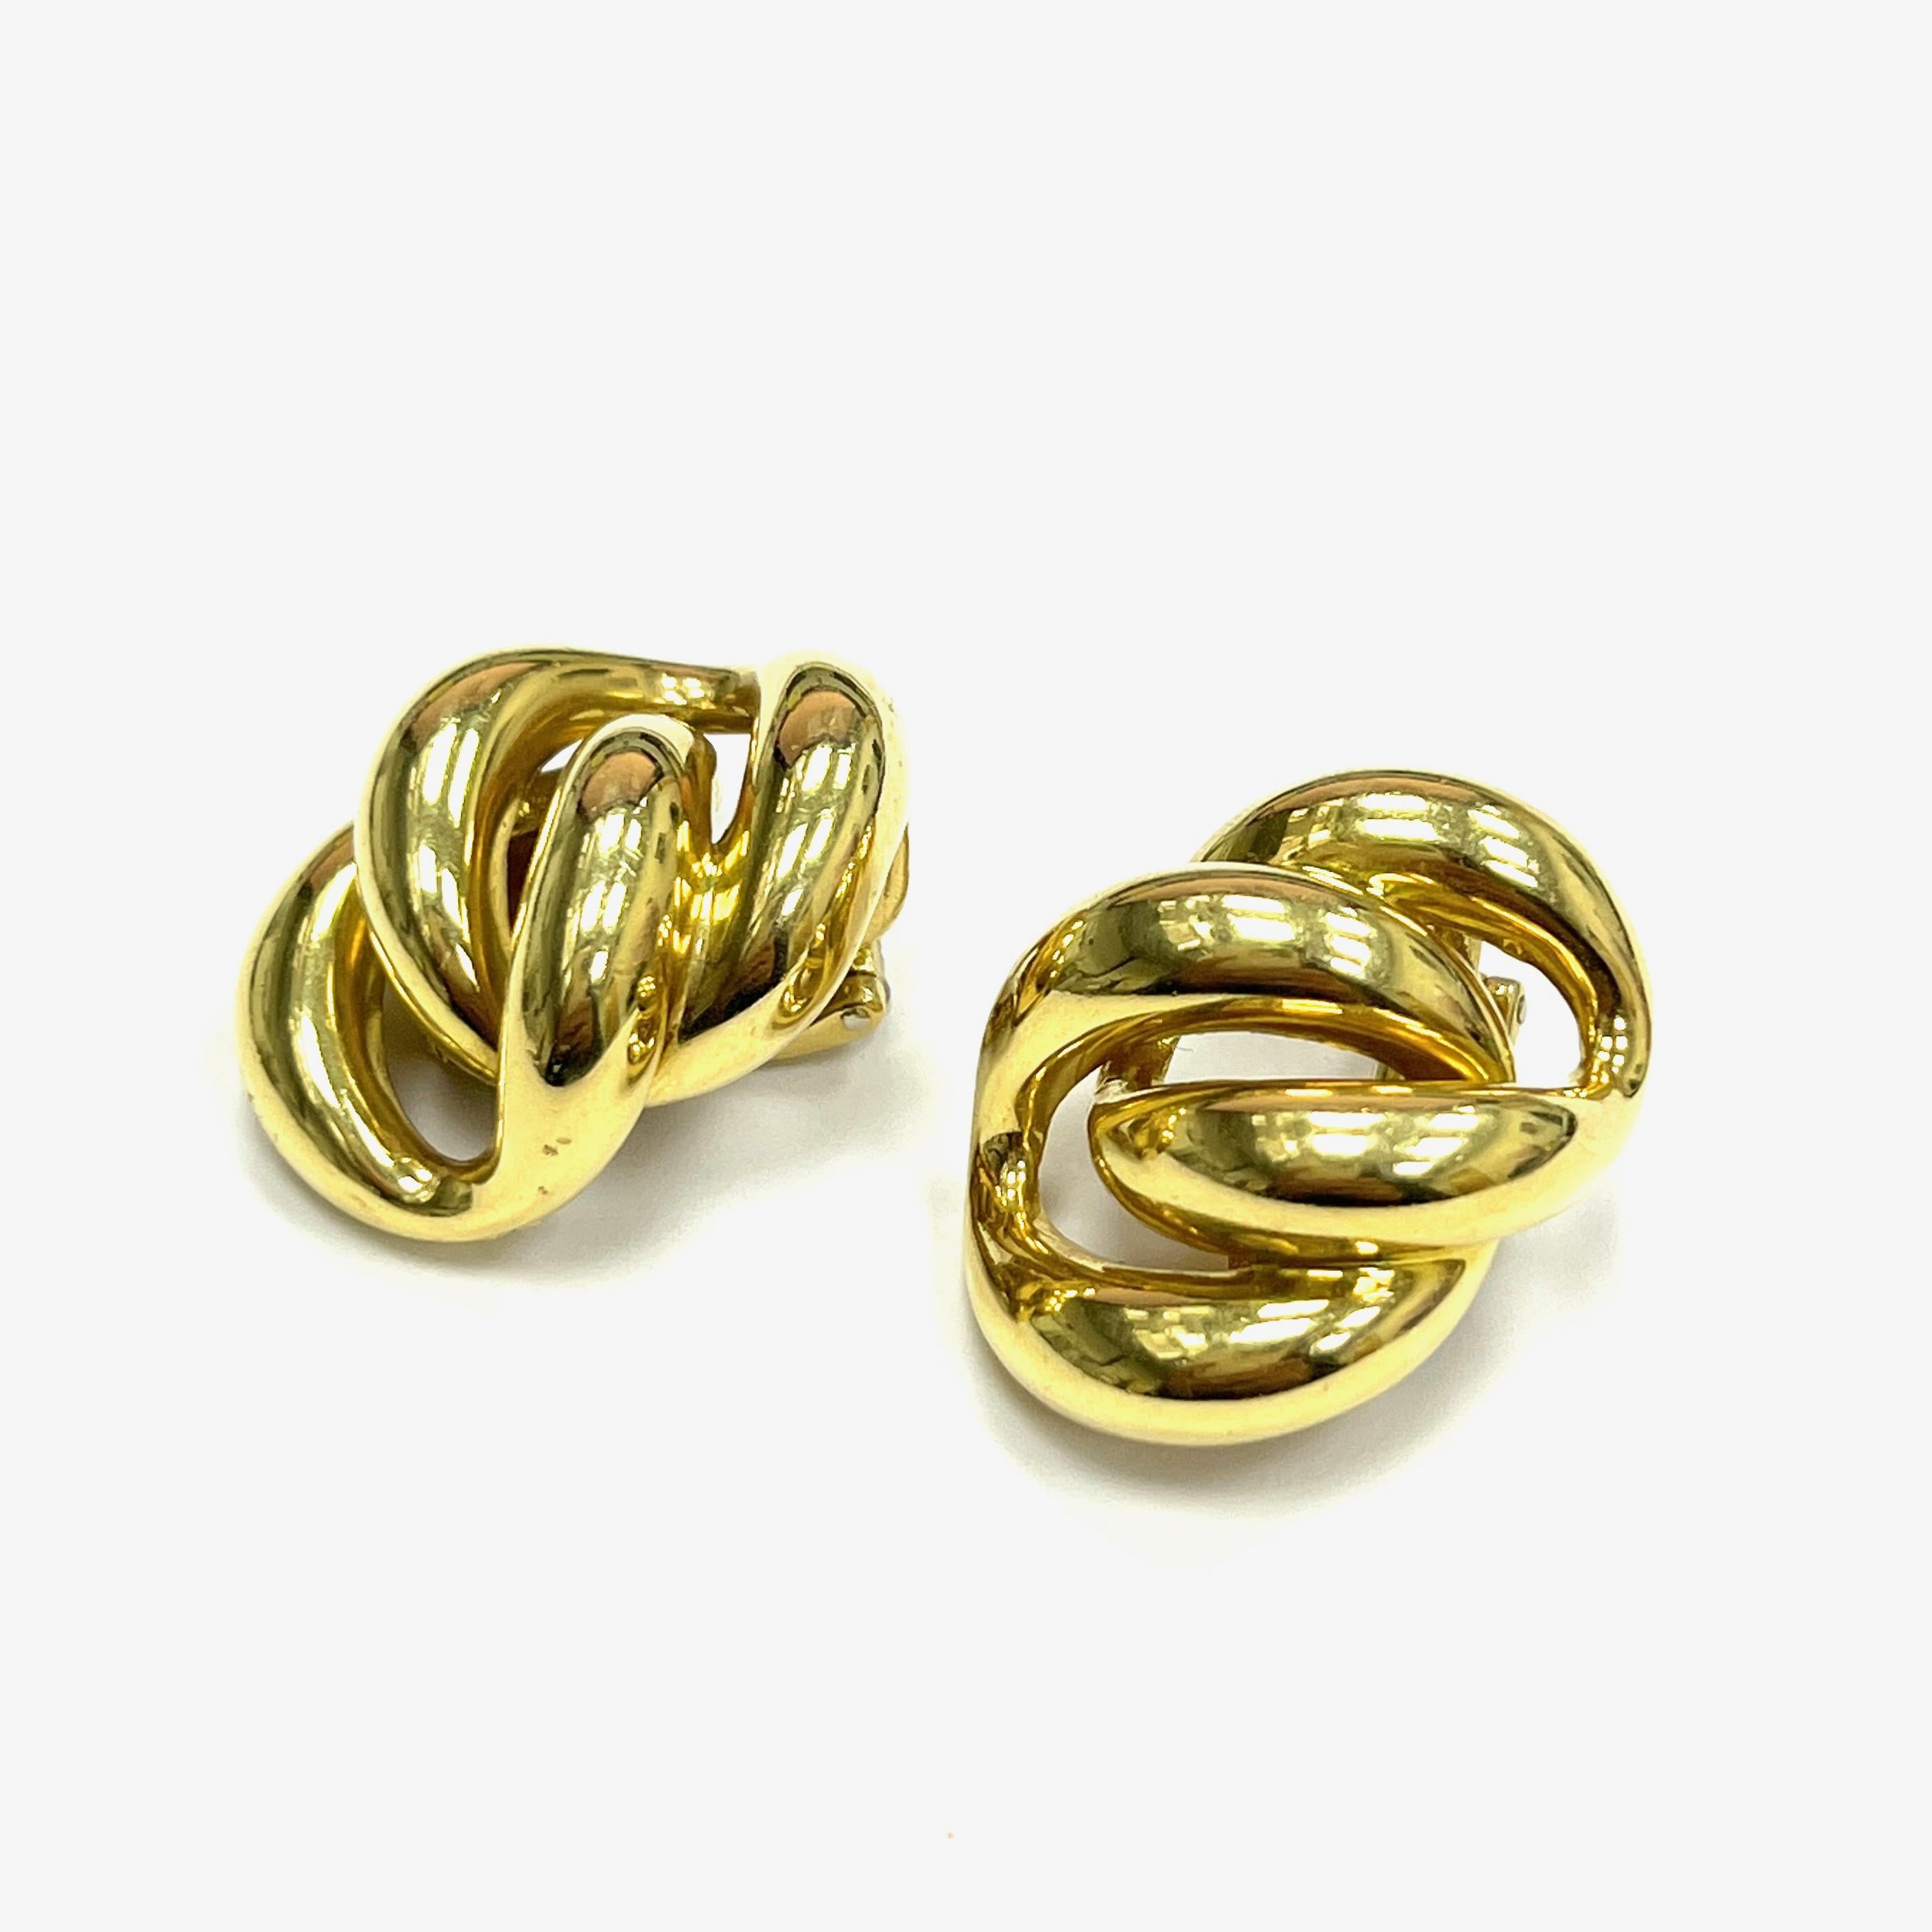 Tiffany & Co. interlinking gold ear clips

A beautiful pair of 18 karat yellow gold, featuring an interlinking design; marked Tiffany & Co., 18k

Size: width 2 cm, length 2.6 cm
Total weight: 27.4 grams

Comes with original Tiffany & Co. box